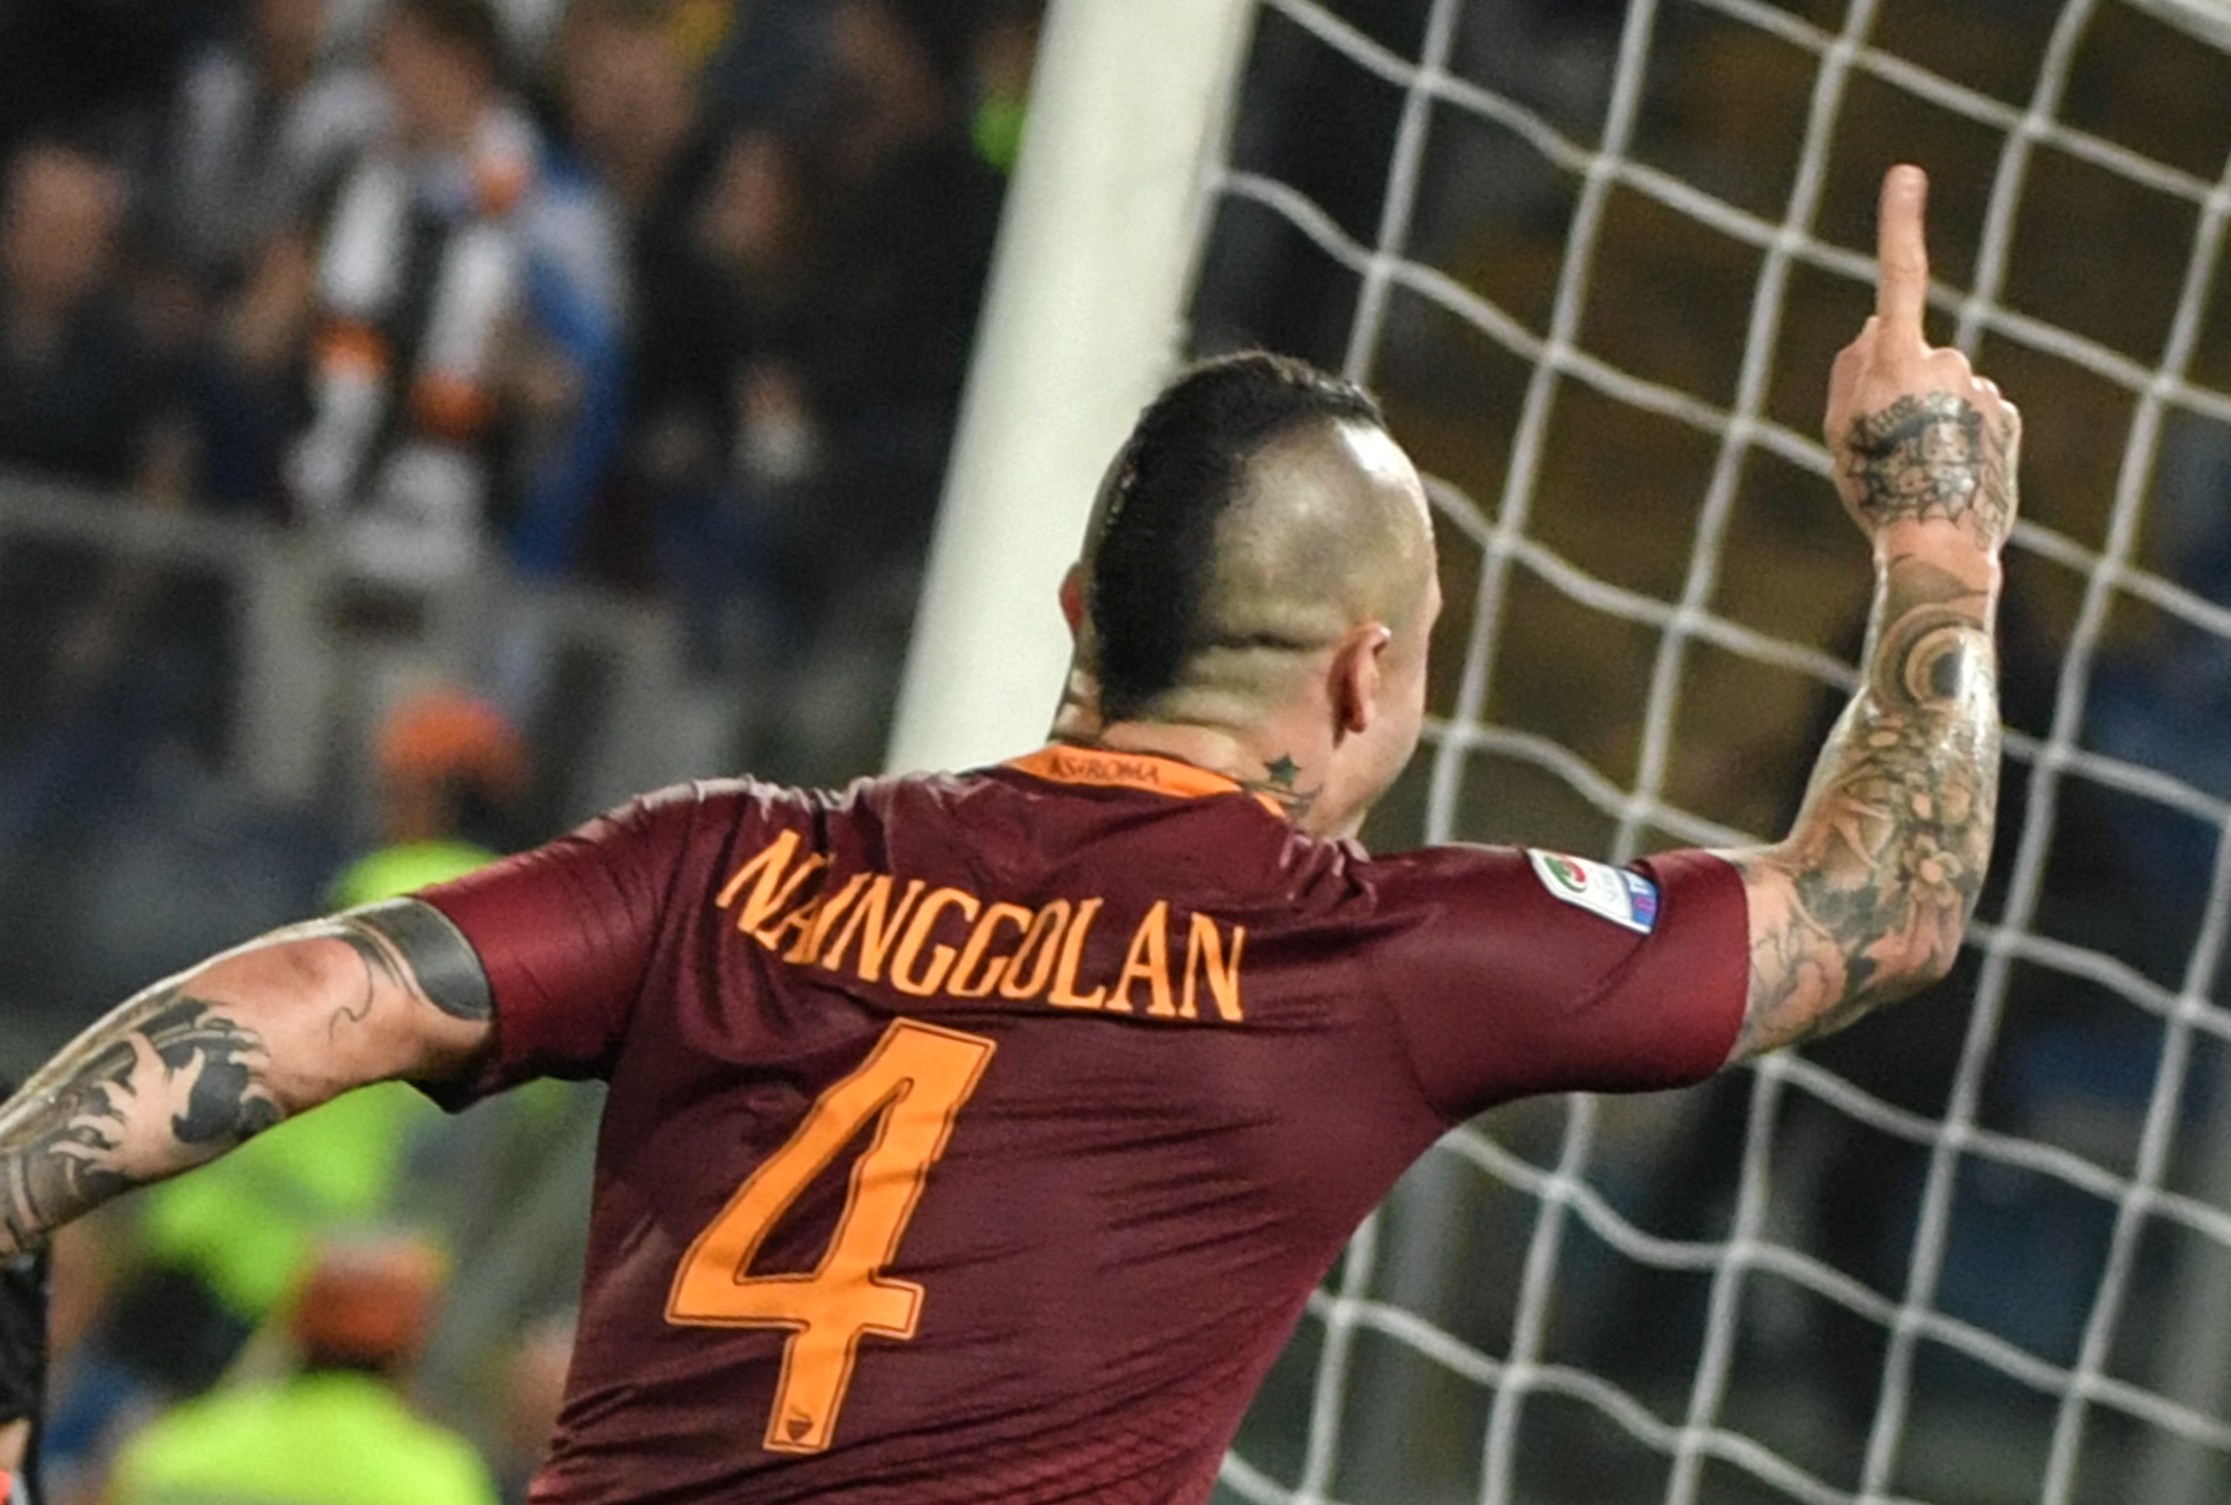 AS Roma's midfielder from Belgium Radja Nainggolan (R) celebrates after scoring against Juventus' goalkeeper from Italy Gianluigi Buffon during the Italian Serie A football match Roma vs Juventus, on May 14, 2017 at Rome's Olympic stadium. / AFP PHOTO / Andreas SOLARO        (Photo credit should read ANDREAS SOLARO/AFP/Getty Images)